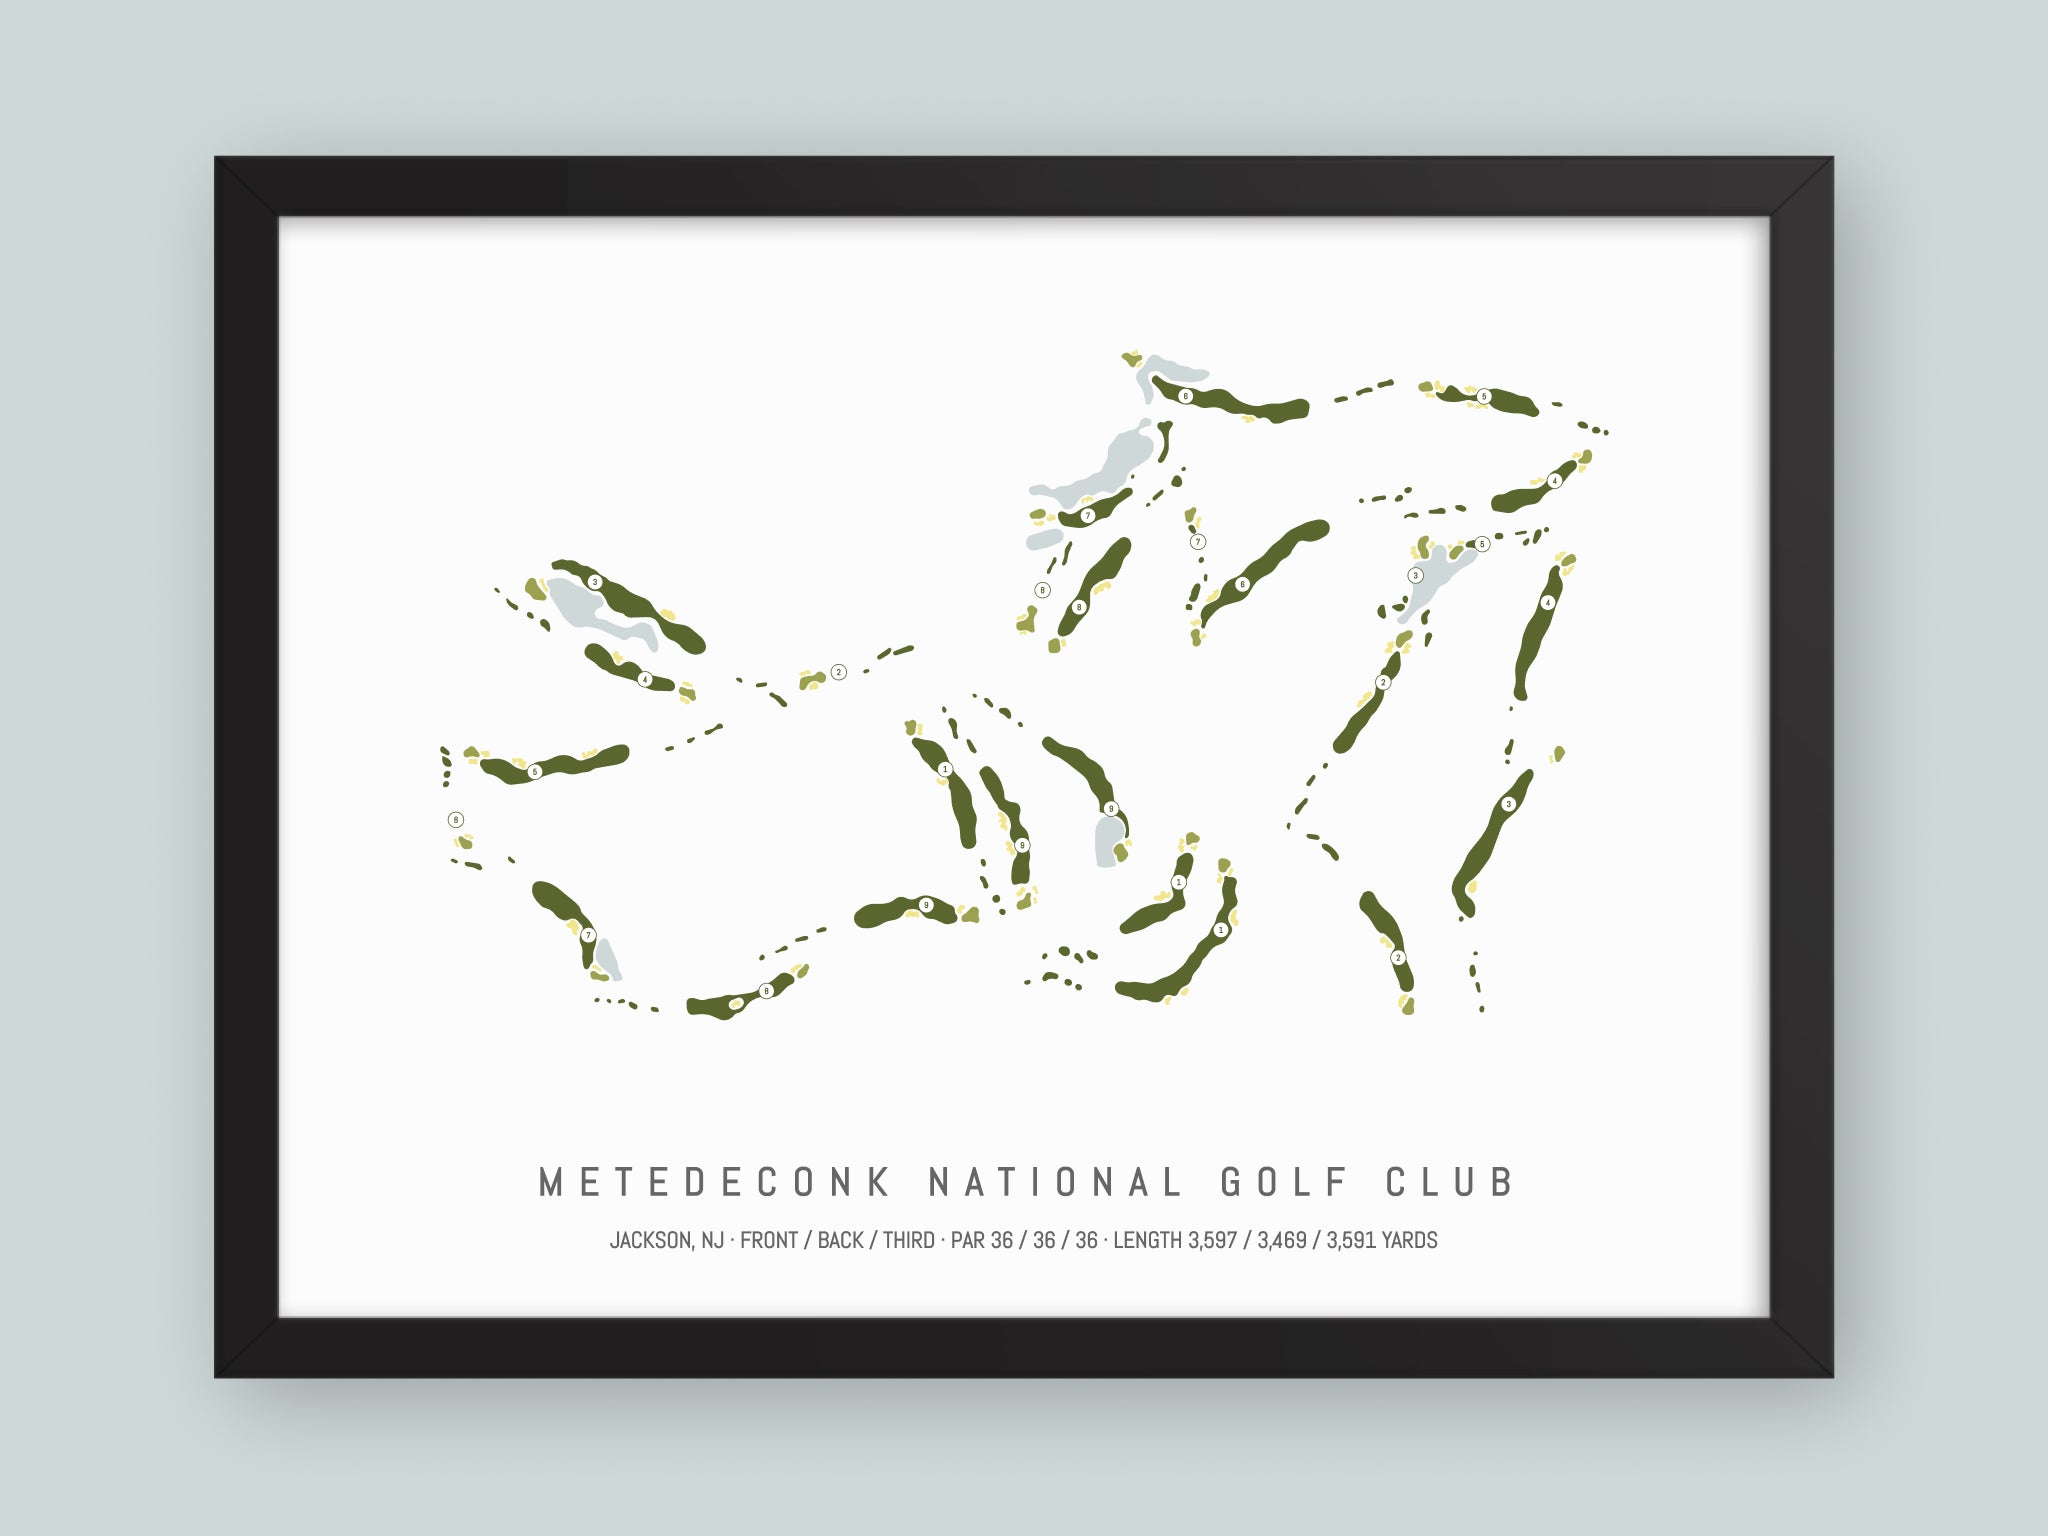 Metedeconk-National-Golf-Club-NJ--Black-Frame-24x18-With-Hole-Numbers